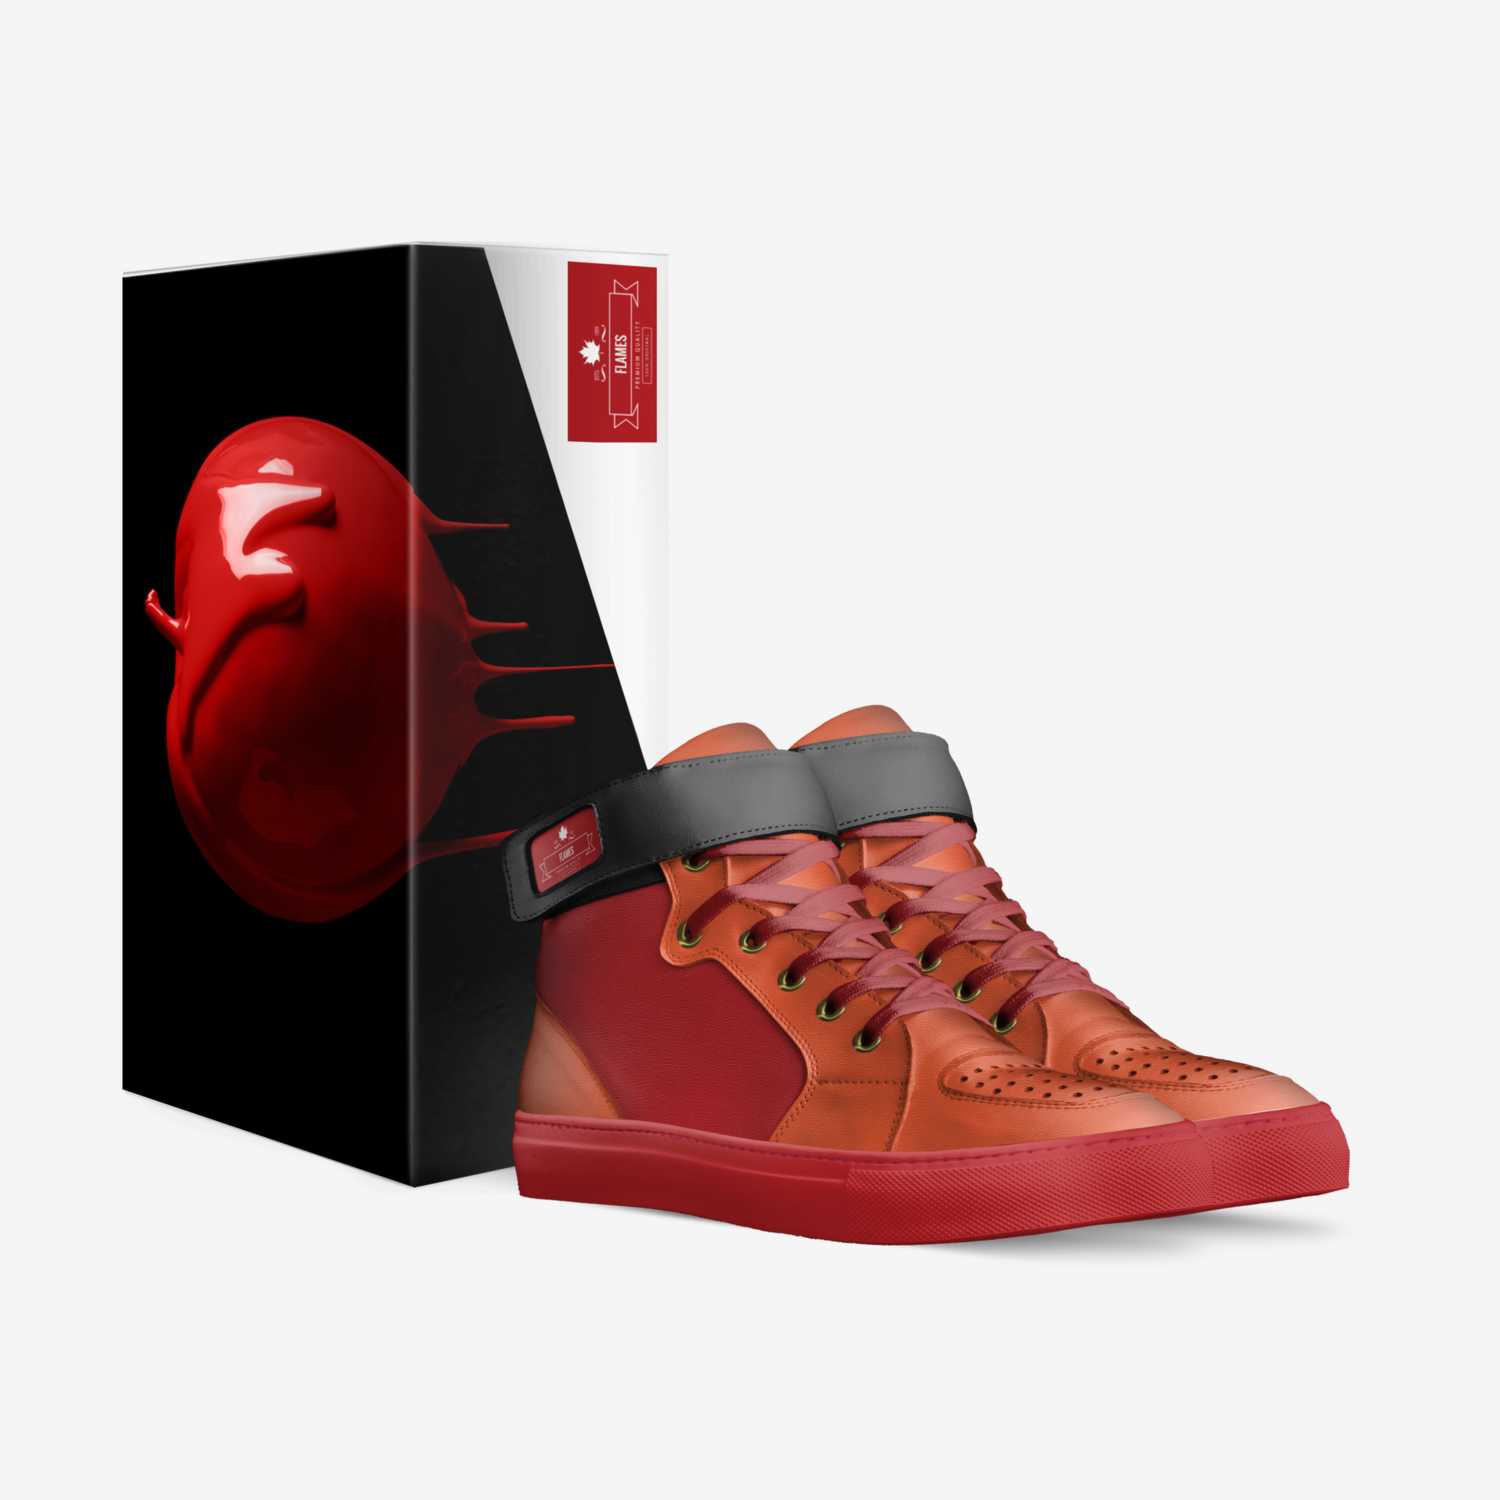 DXH 1 "Flames" custom made in Italy shoes by Dorian Holland | Box view